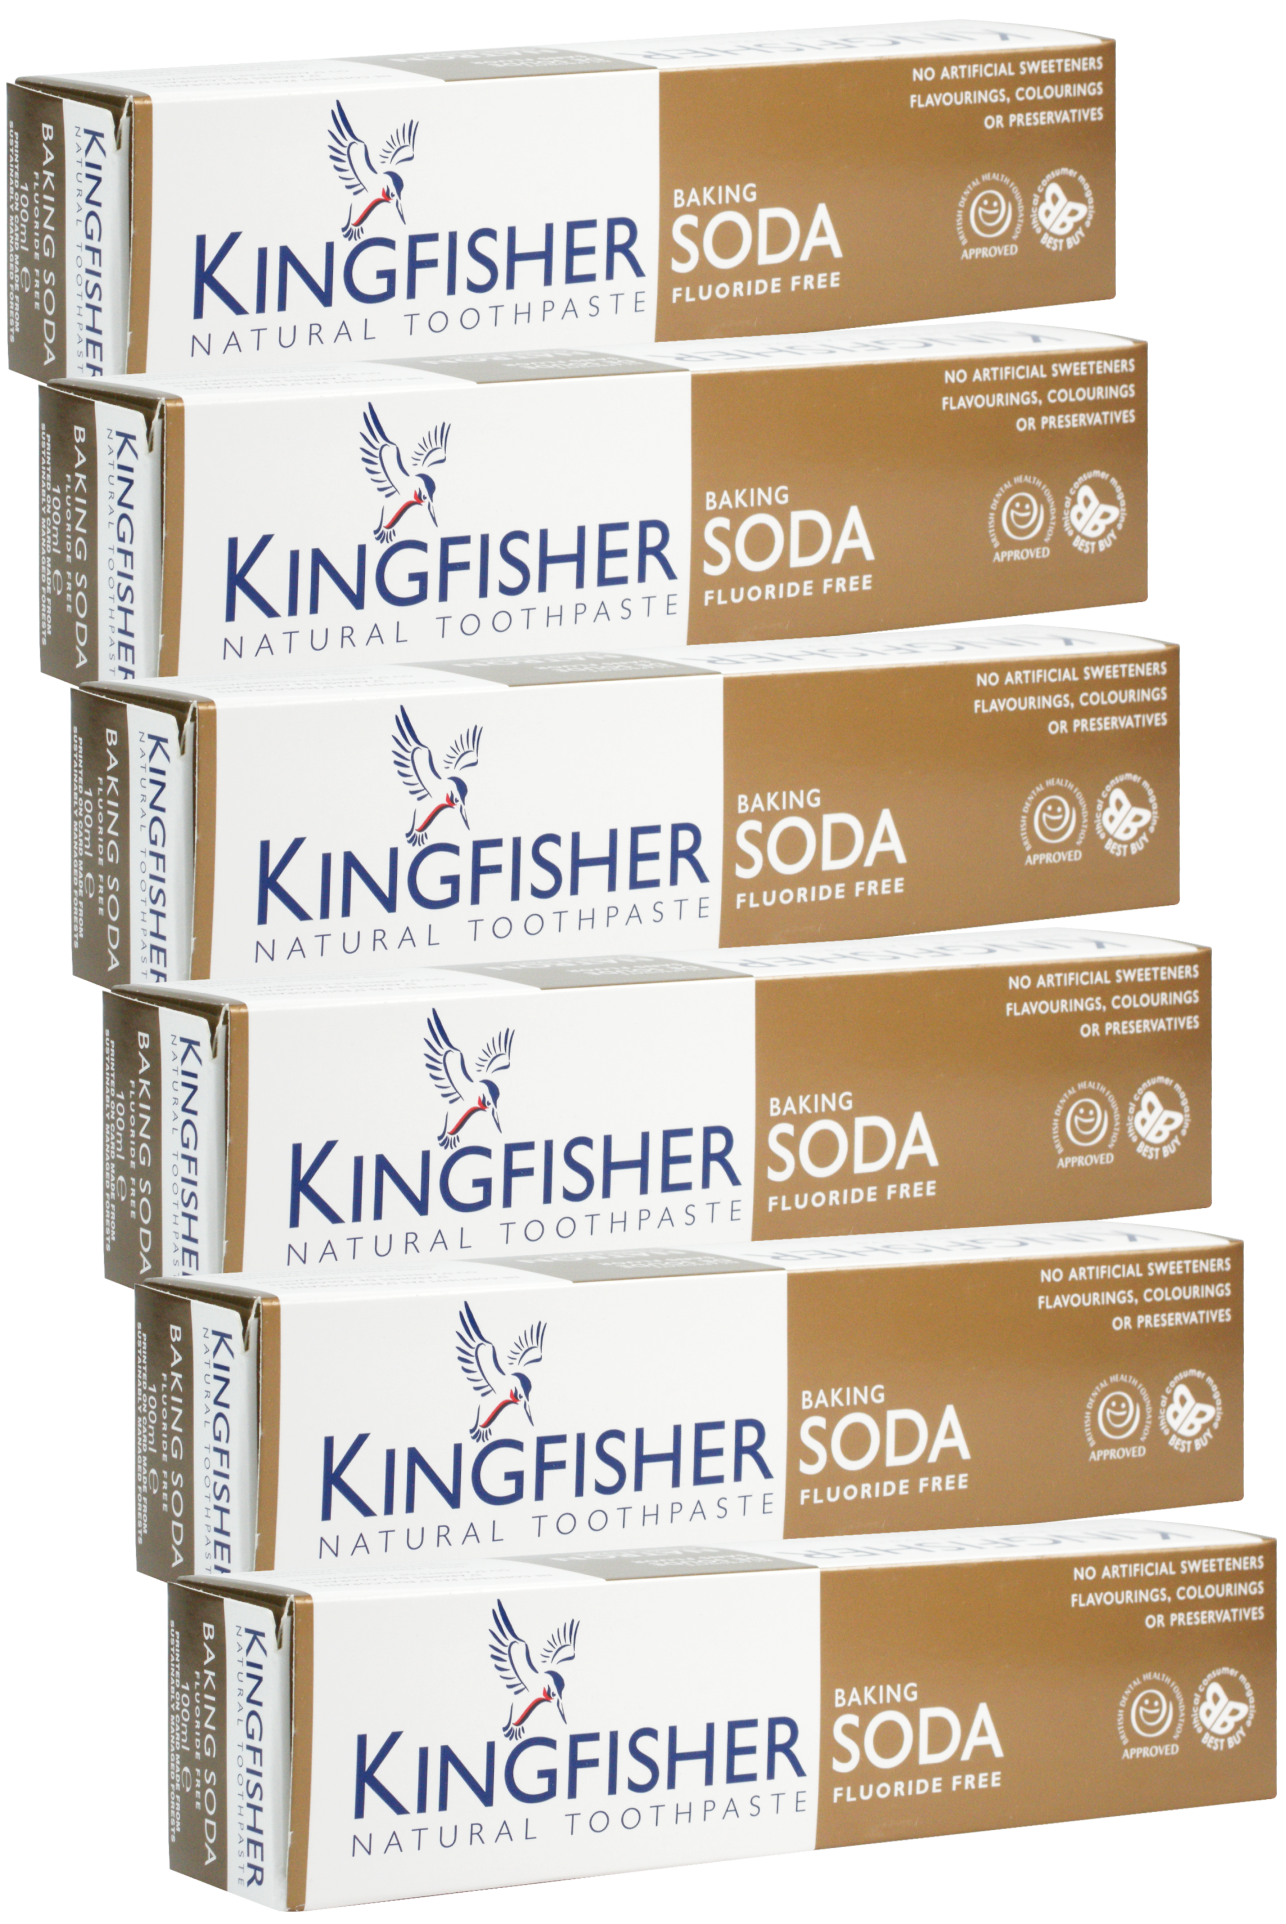 Kingfisher Toothpaste - Baking Soda Fluoride Free Toothpaste (100ml) - Pack of 6